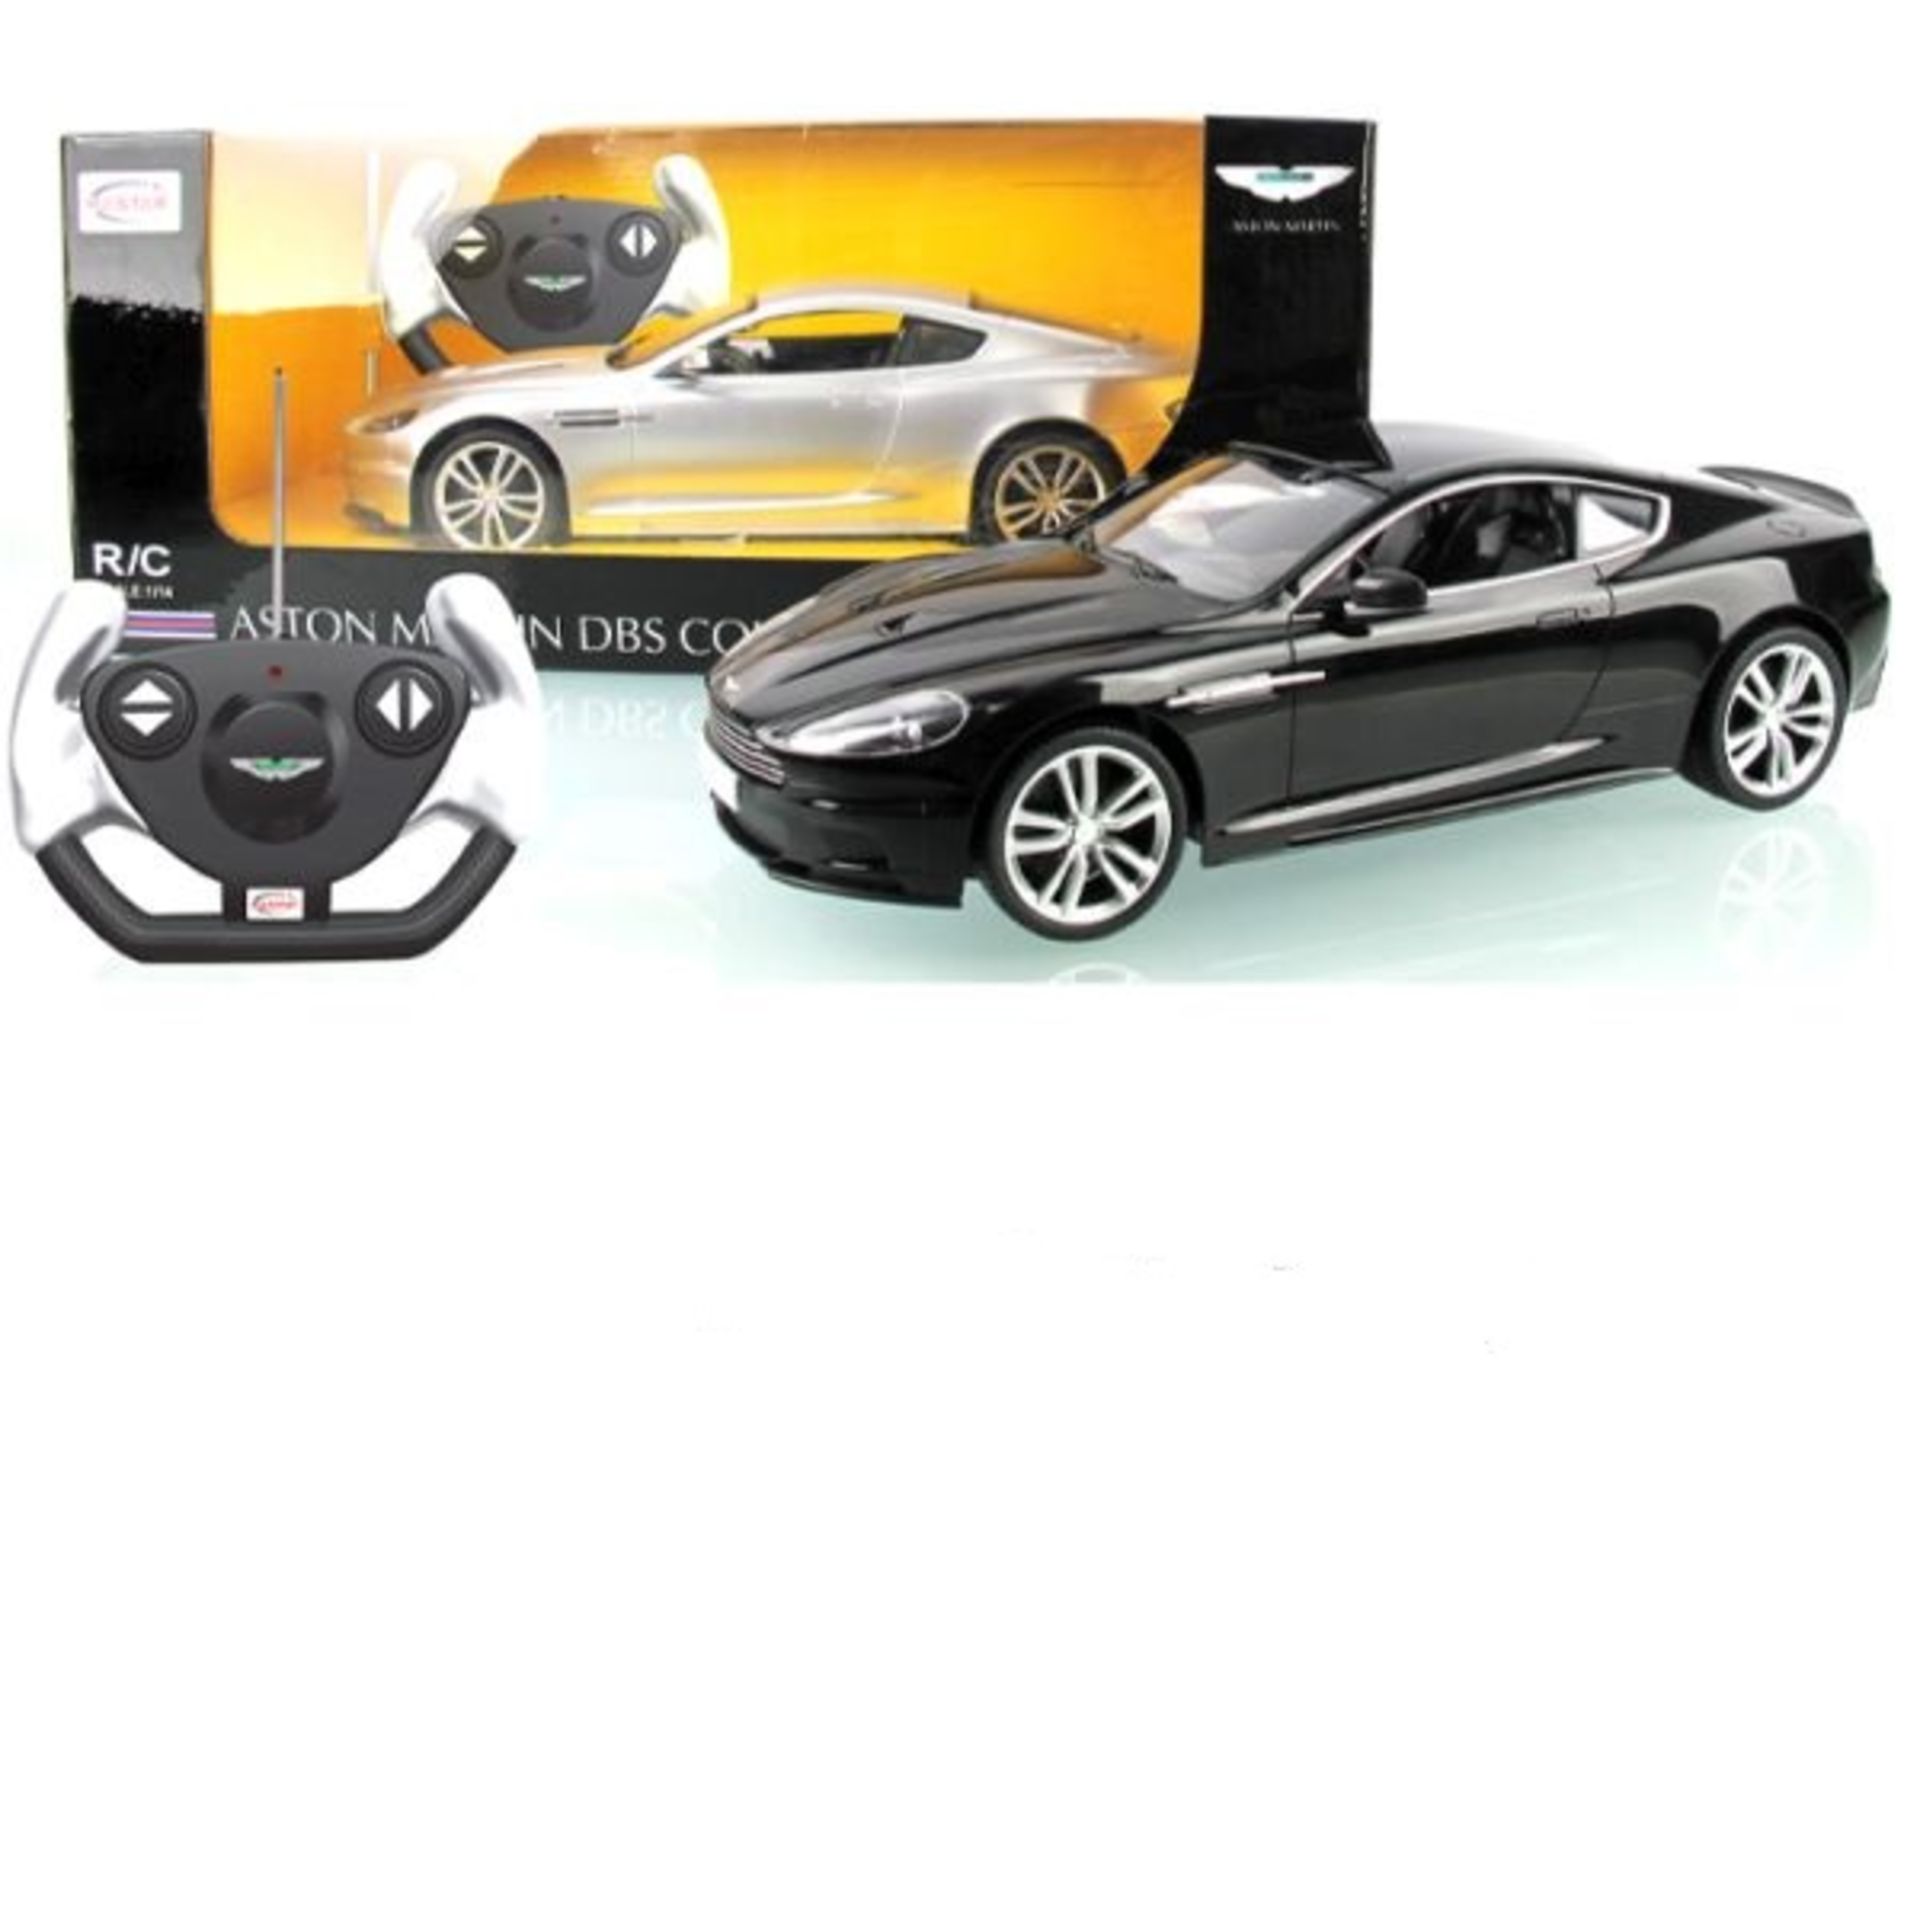 V *TRADE QTY* Brand New 1:14 Scale Aston Martin DBS Coupe X 3 YOUR BID PRICE TO BE MULTIPLIED BY